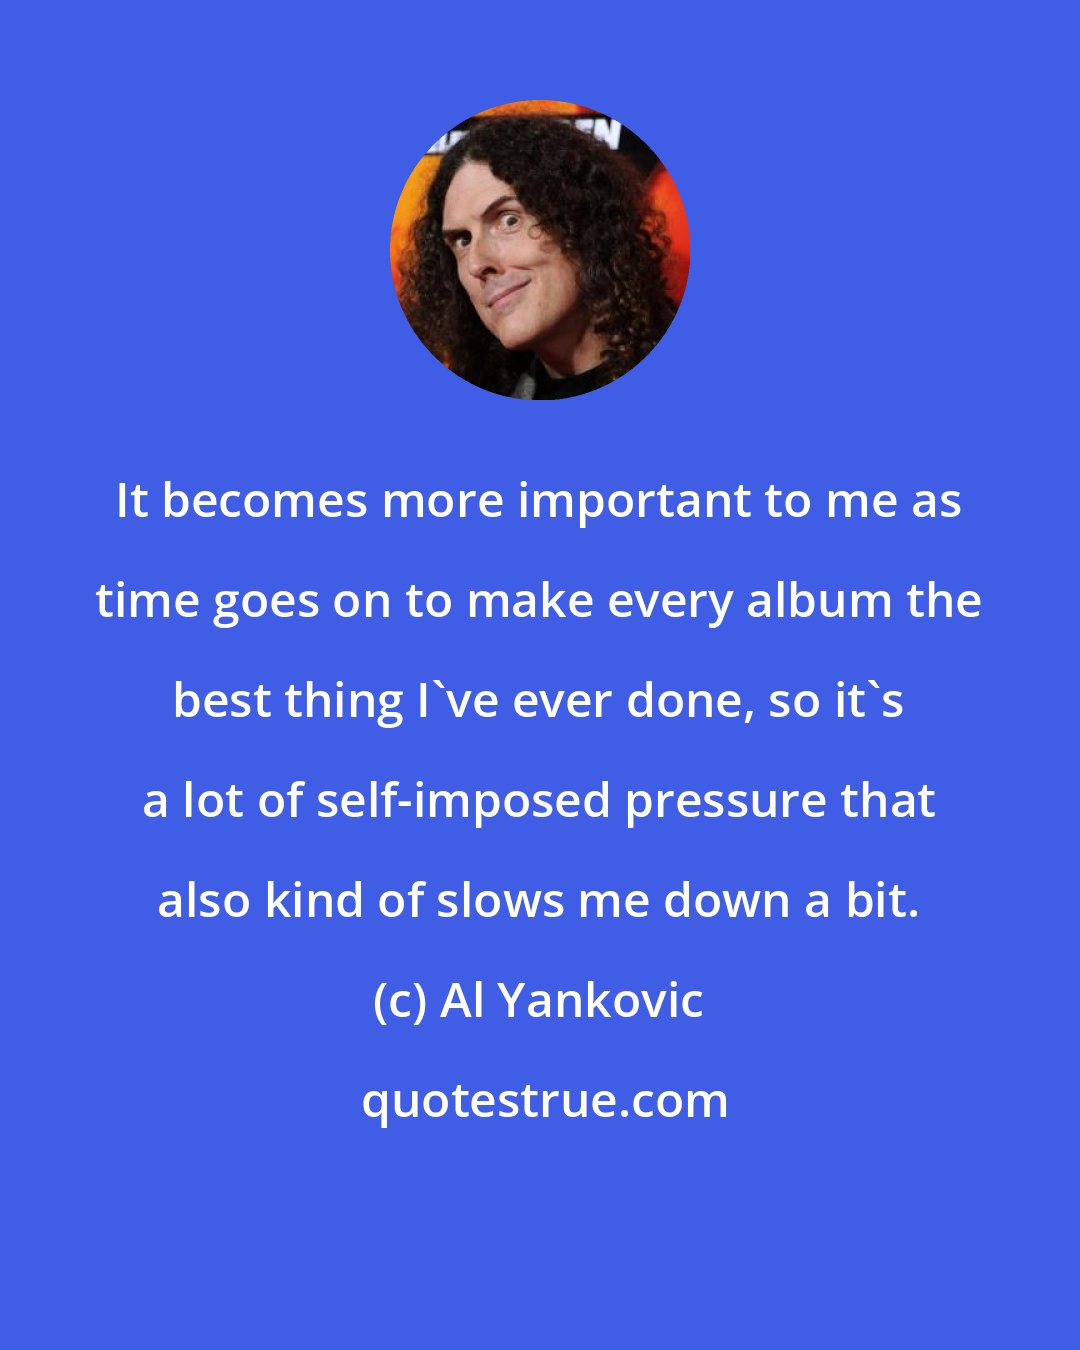 Al Yankovic: It becomes more important to me as time goes on to make every album the best thing I've ever done, so it's a lot of self-imposed pressure that also kind of slows me down a bit.